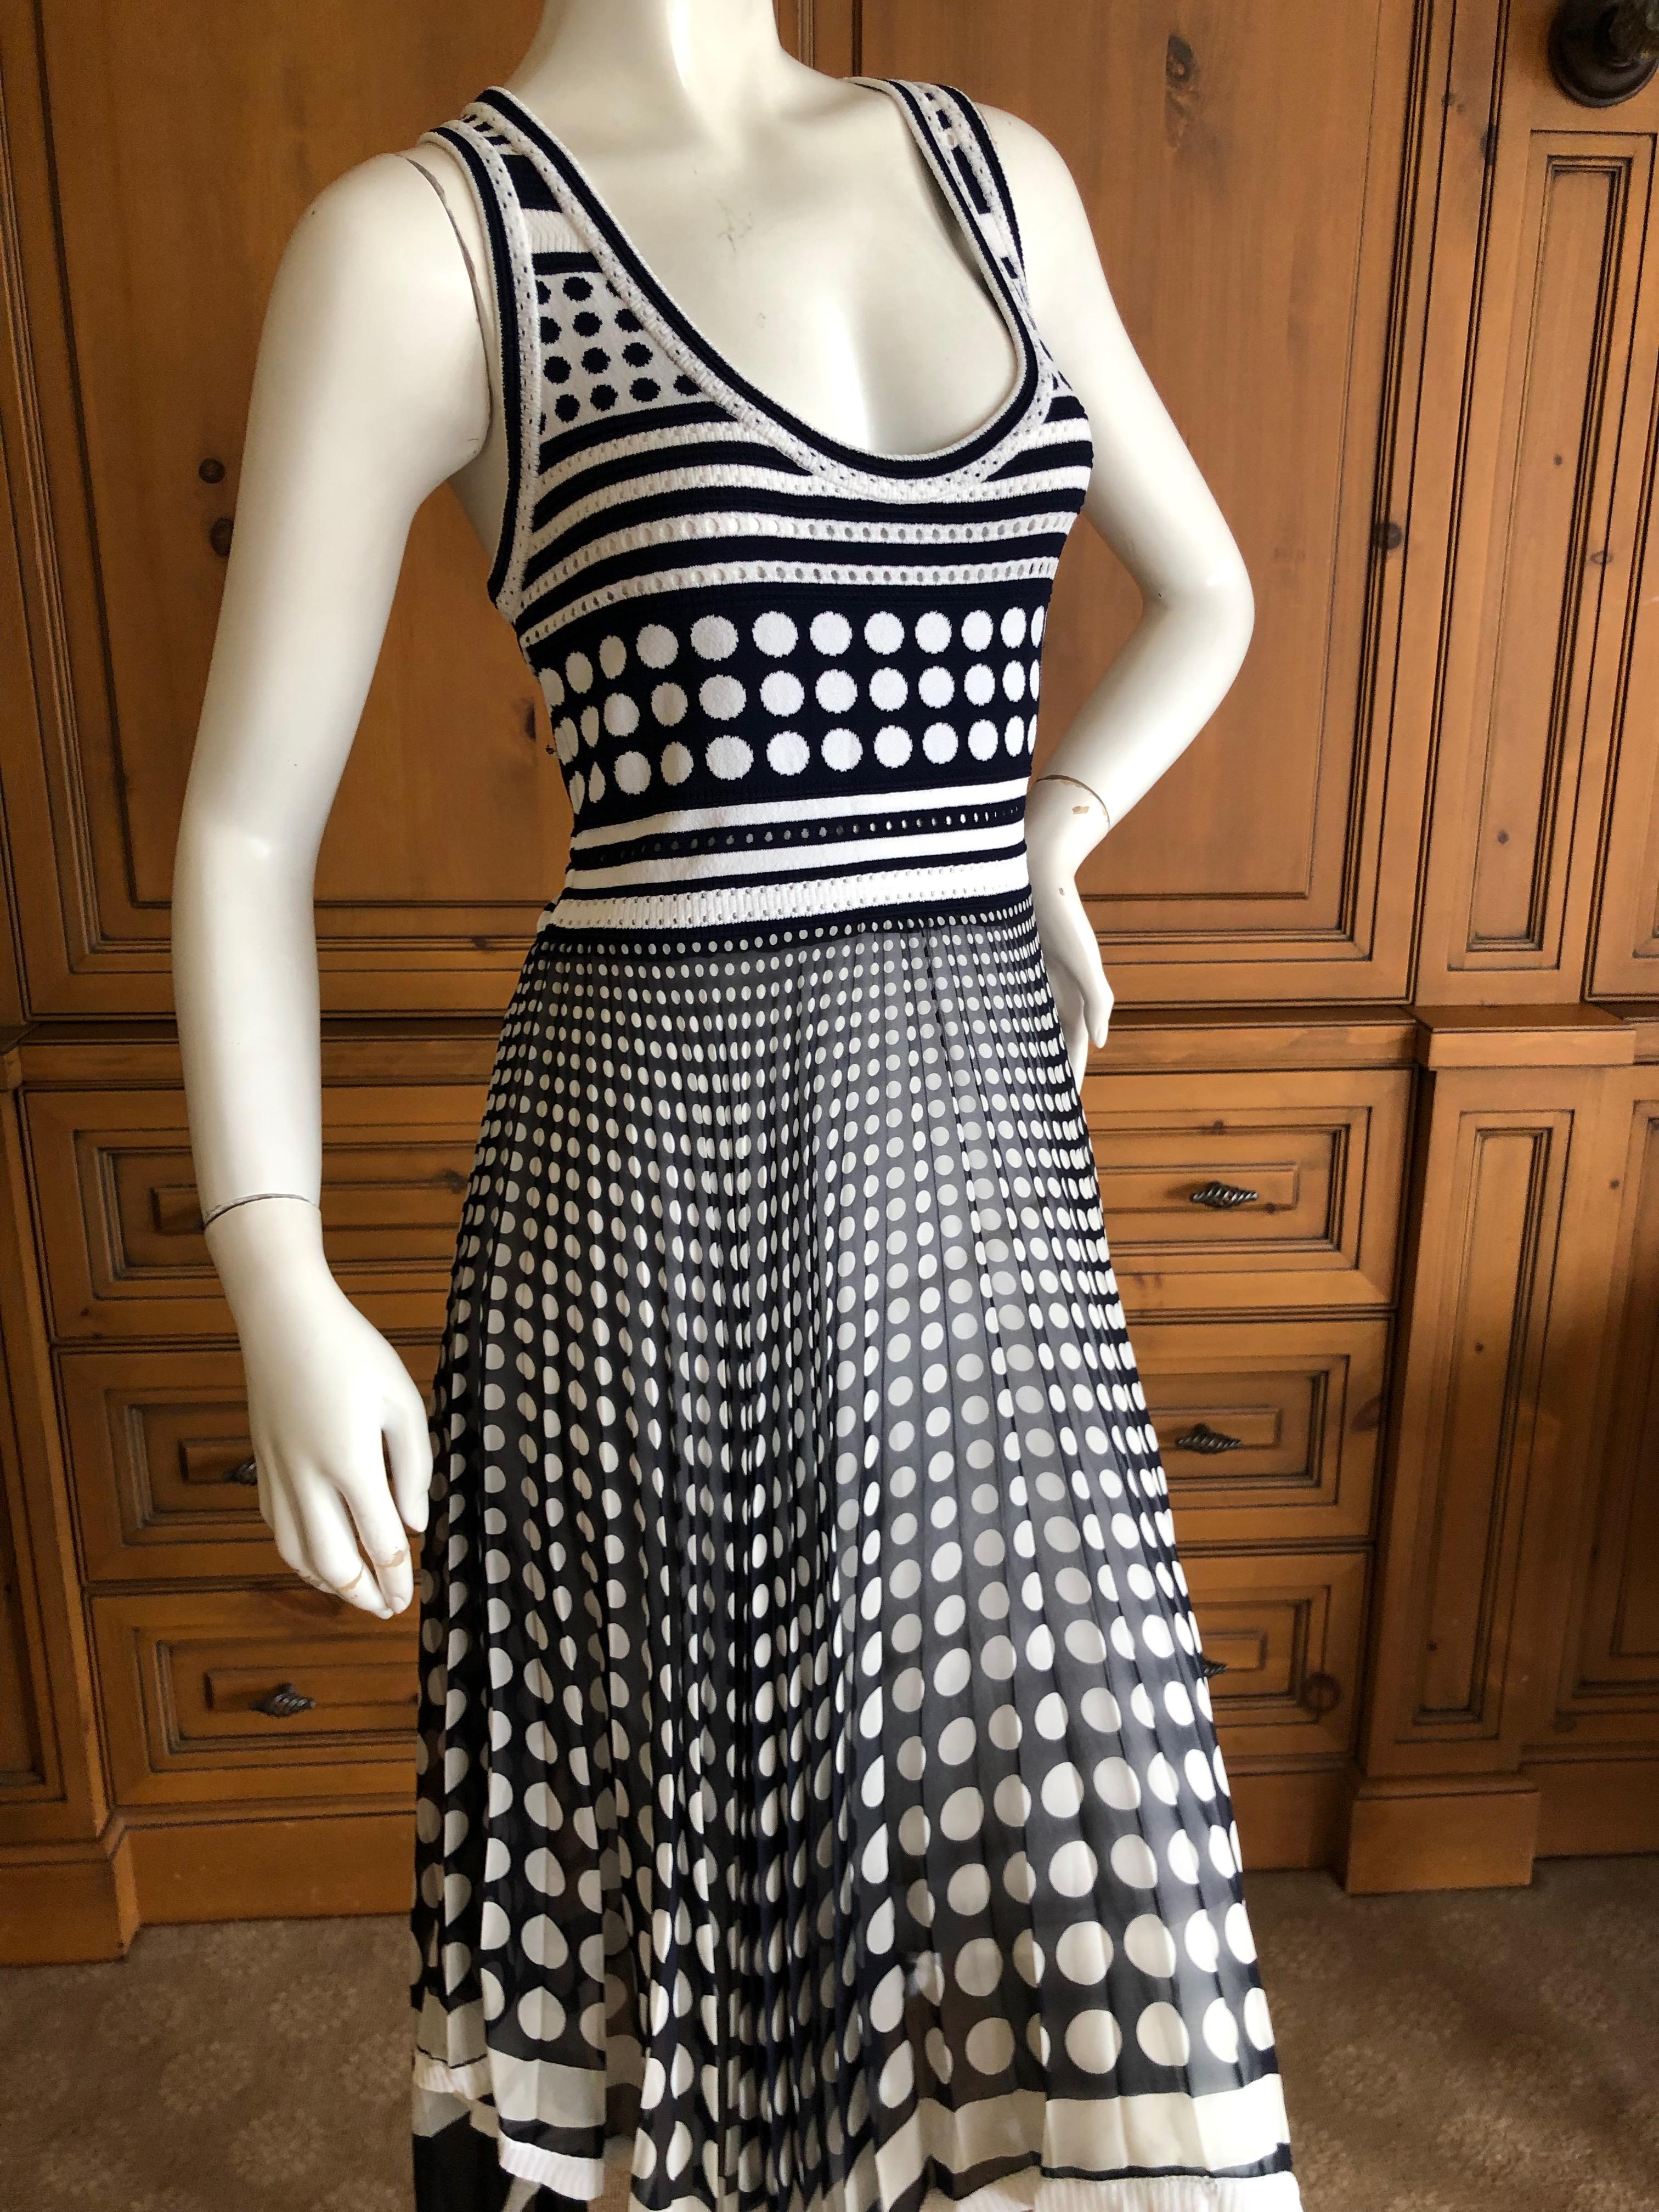 Gianfranco Ferre Vintage Op Art Polka Dot Dress with Pleated Asymmetrical Skirt In Excellent Condition For Sale In Cloverdale, CA